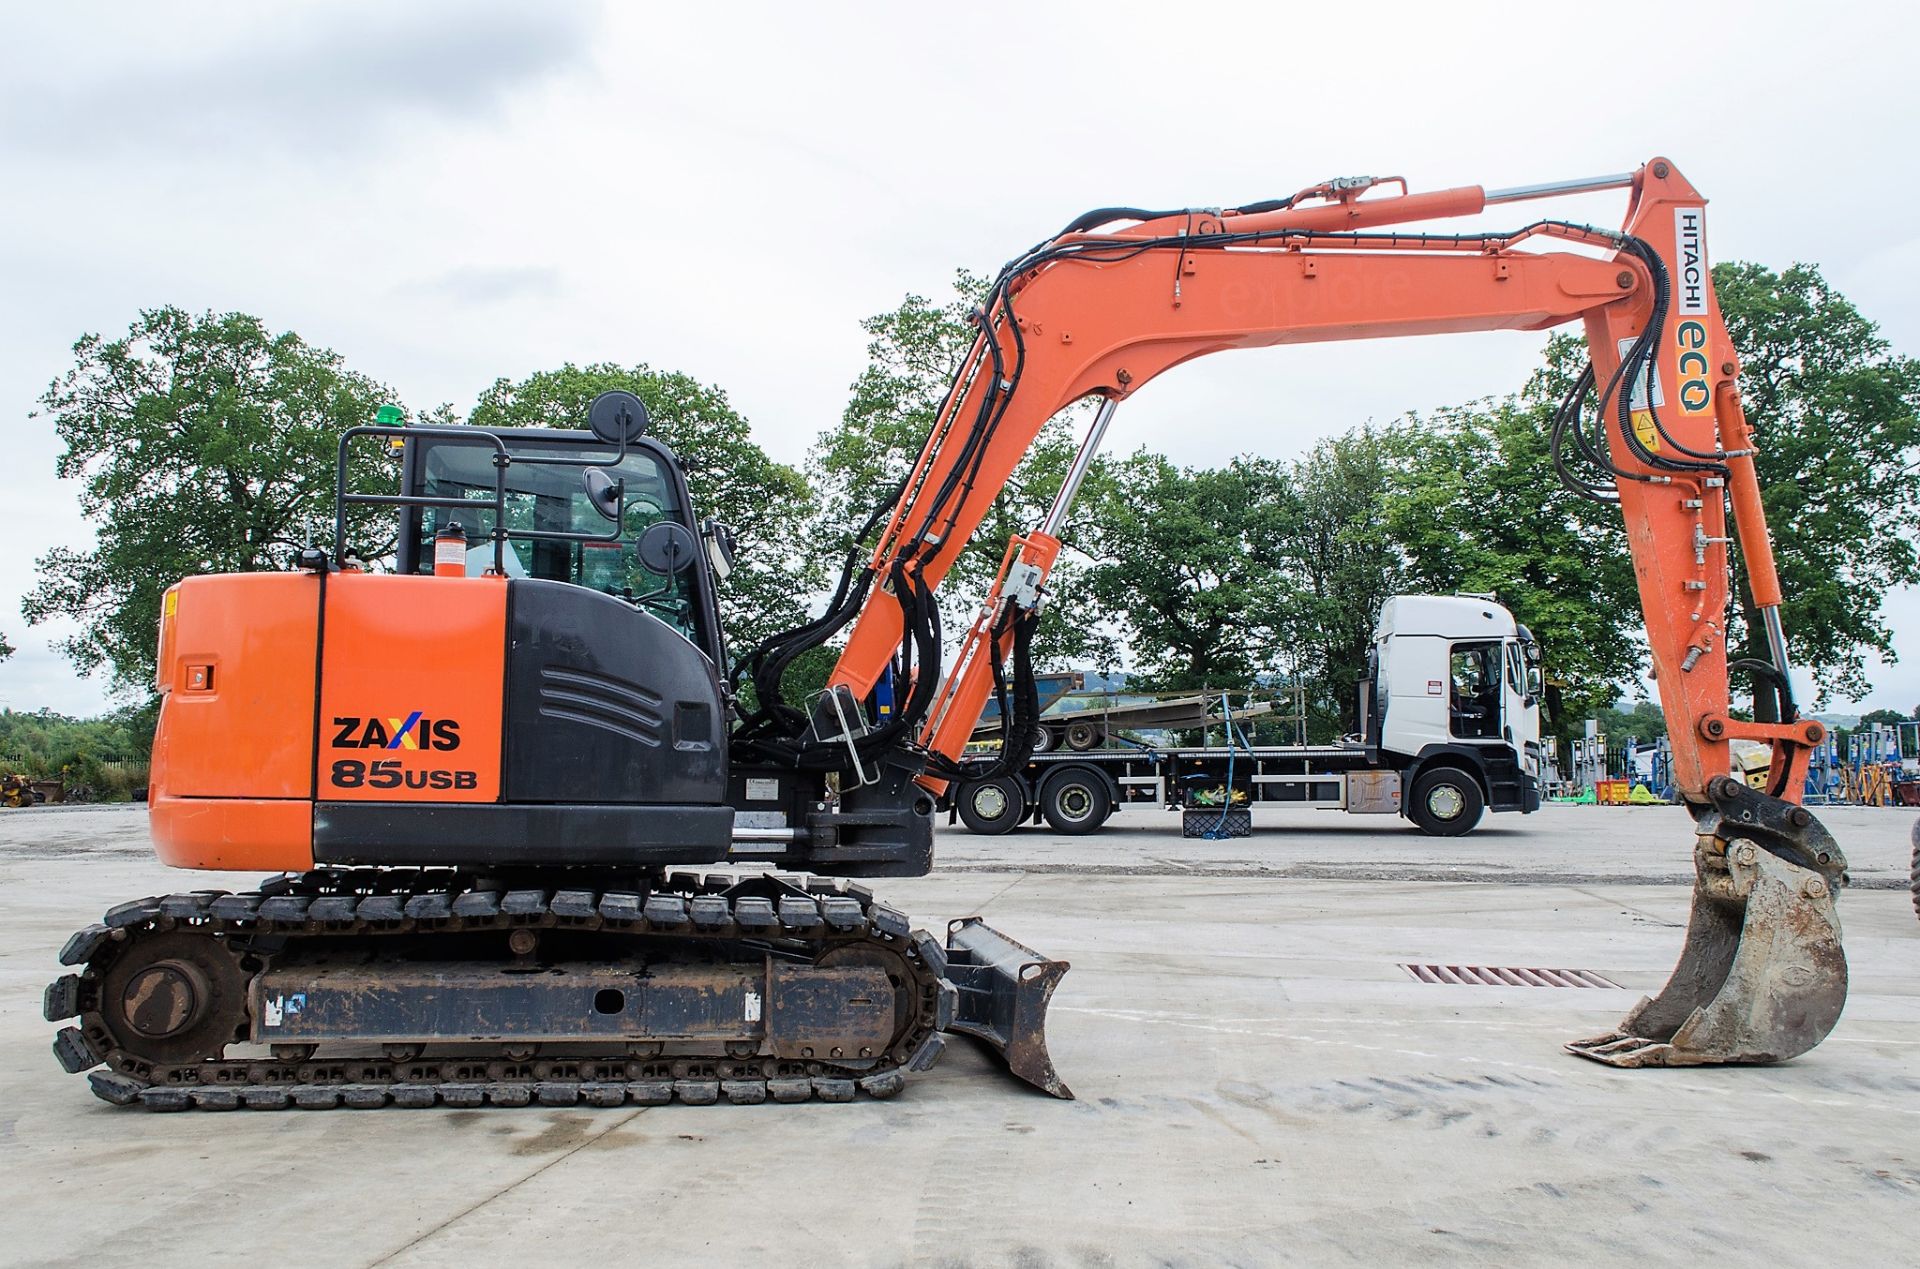 Hitachi Zaxis 85 USB-5 reduced tail swing 8.5 tonne rubber padd tracked excavator - Image 8 of 31